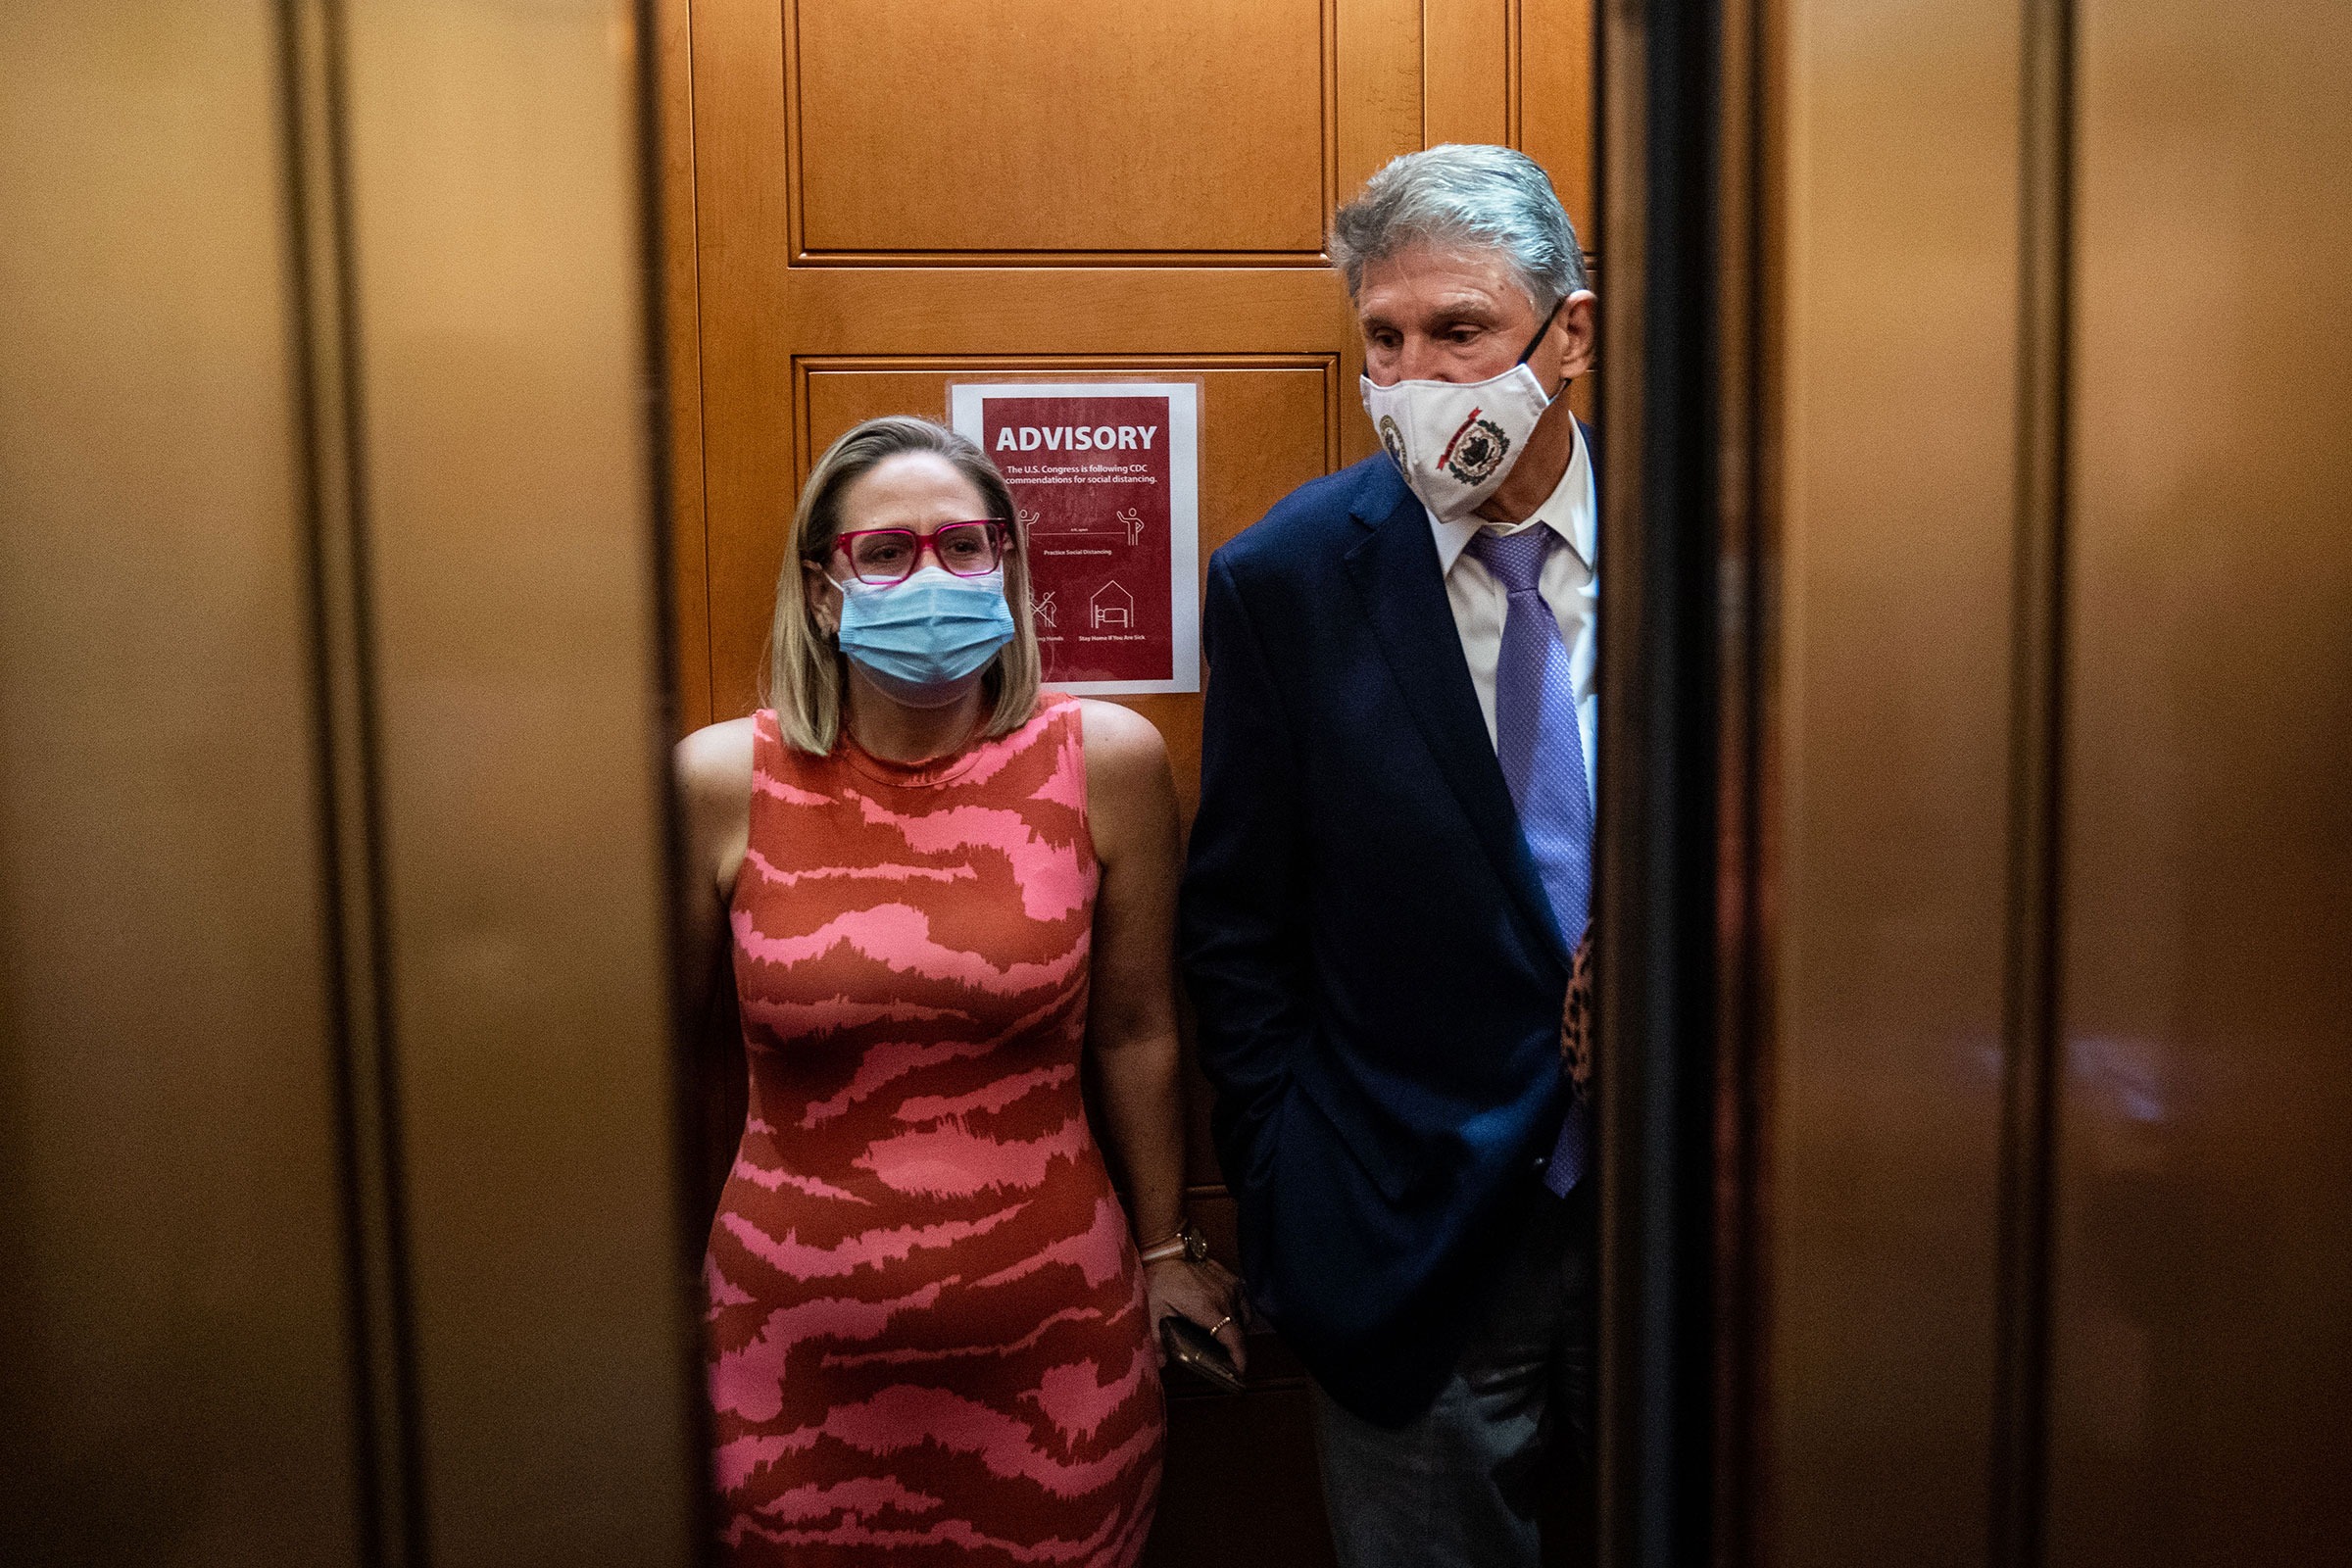 Sen. Kyrsten Sinema and Sen. Joe Manchin in the elevator on their way to go to the Senate Chamber on Sept. 30, 2021 on Capitol Hill in Washington.